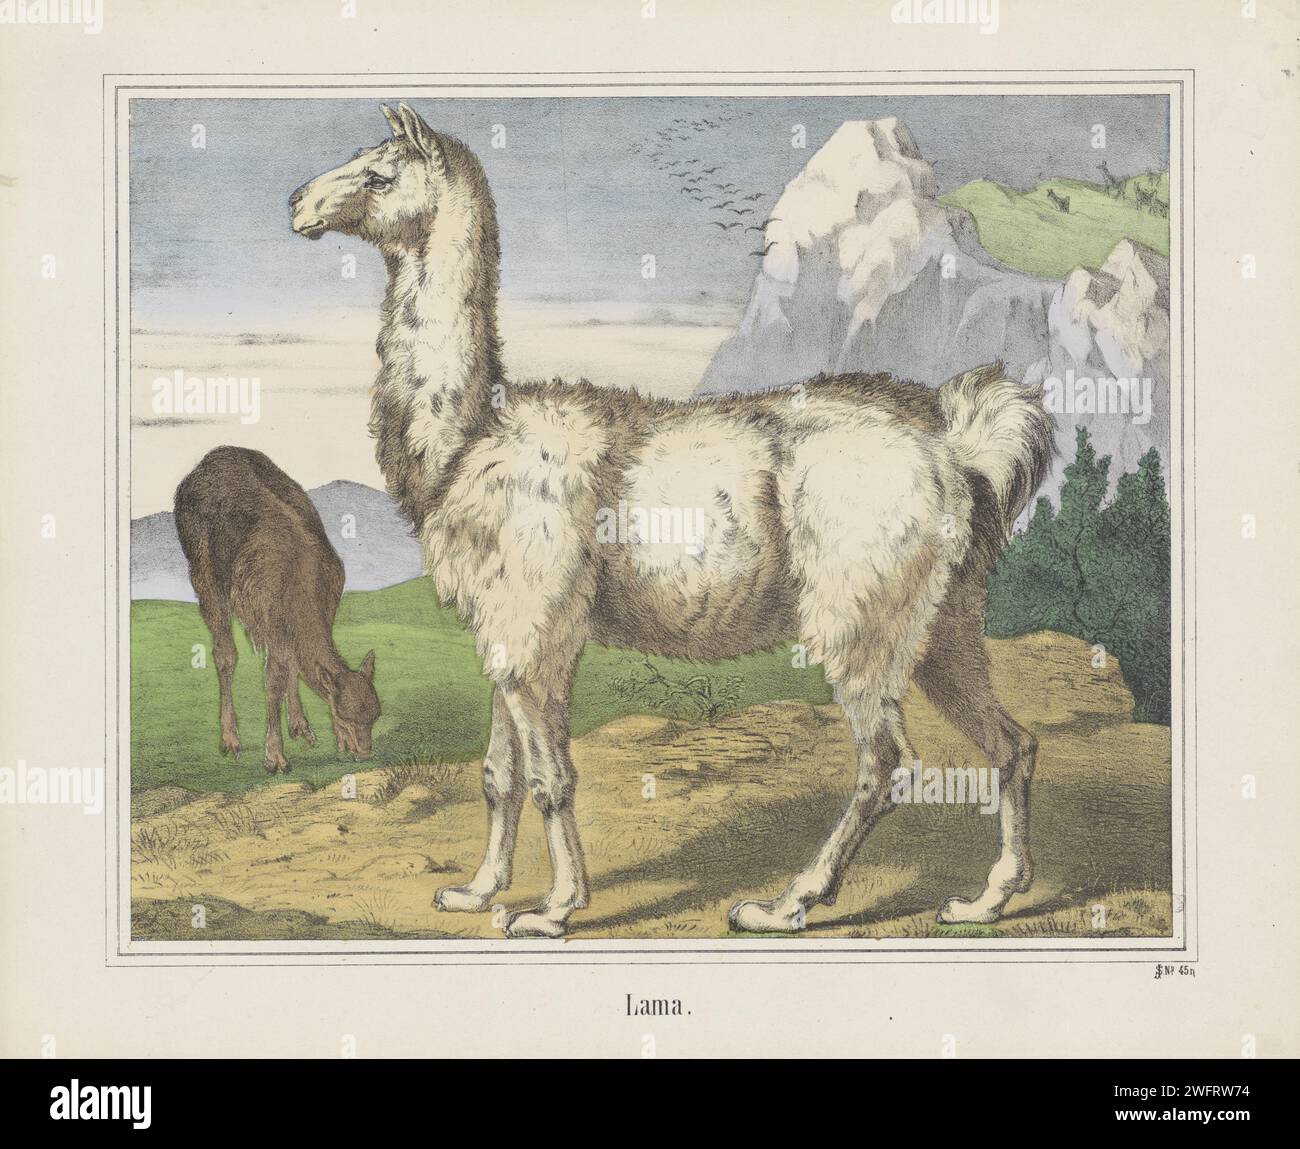 Old, Firm Joseph Scholz, 1829 - 1880 print Two lamas in a mountain landscape. Numbered below: No. 45n. publisher: Mainzprint maker: Europe paper letterpress printing animals. hoofed animals Stock Photo